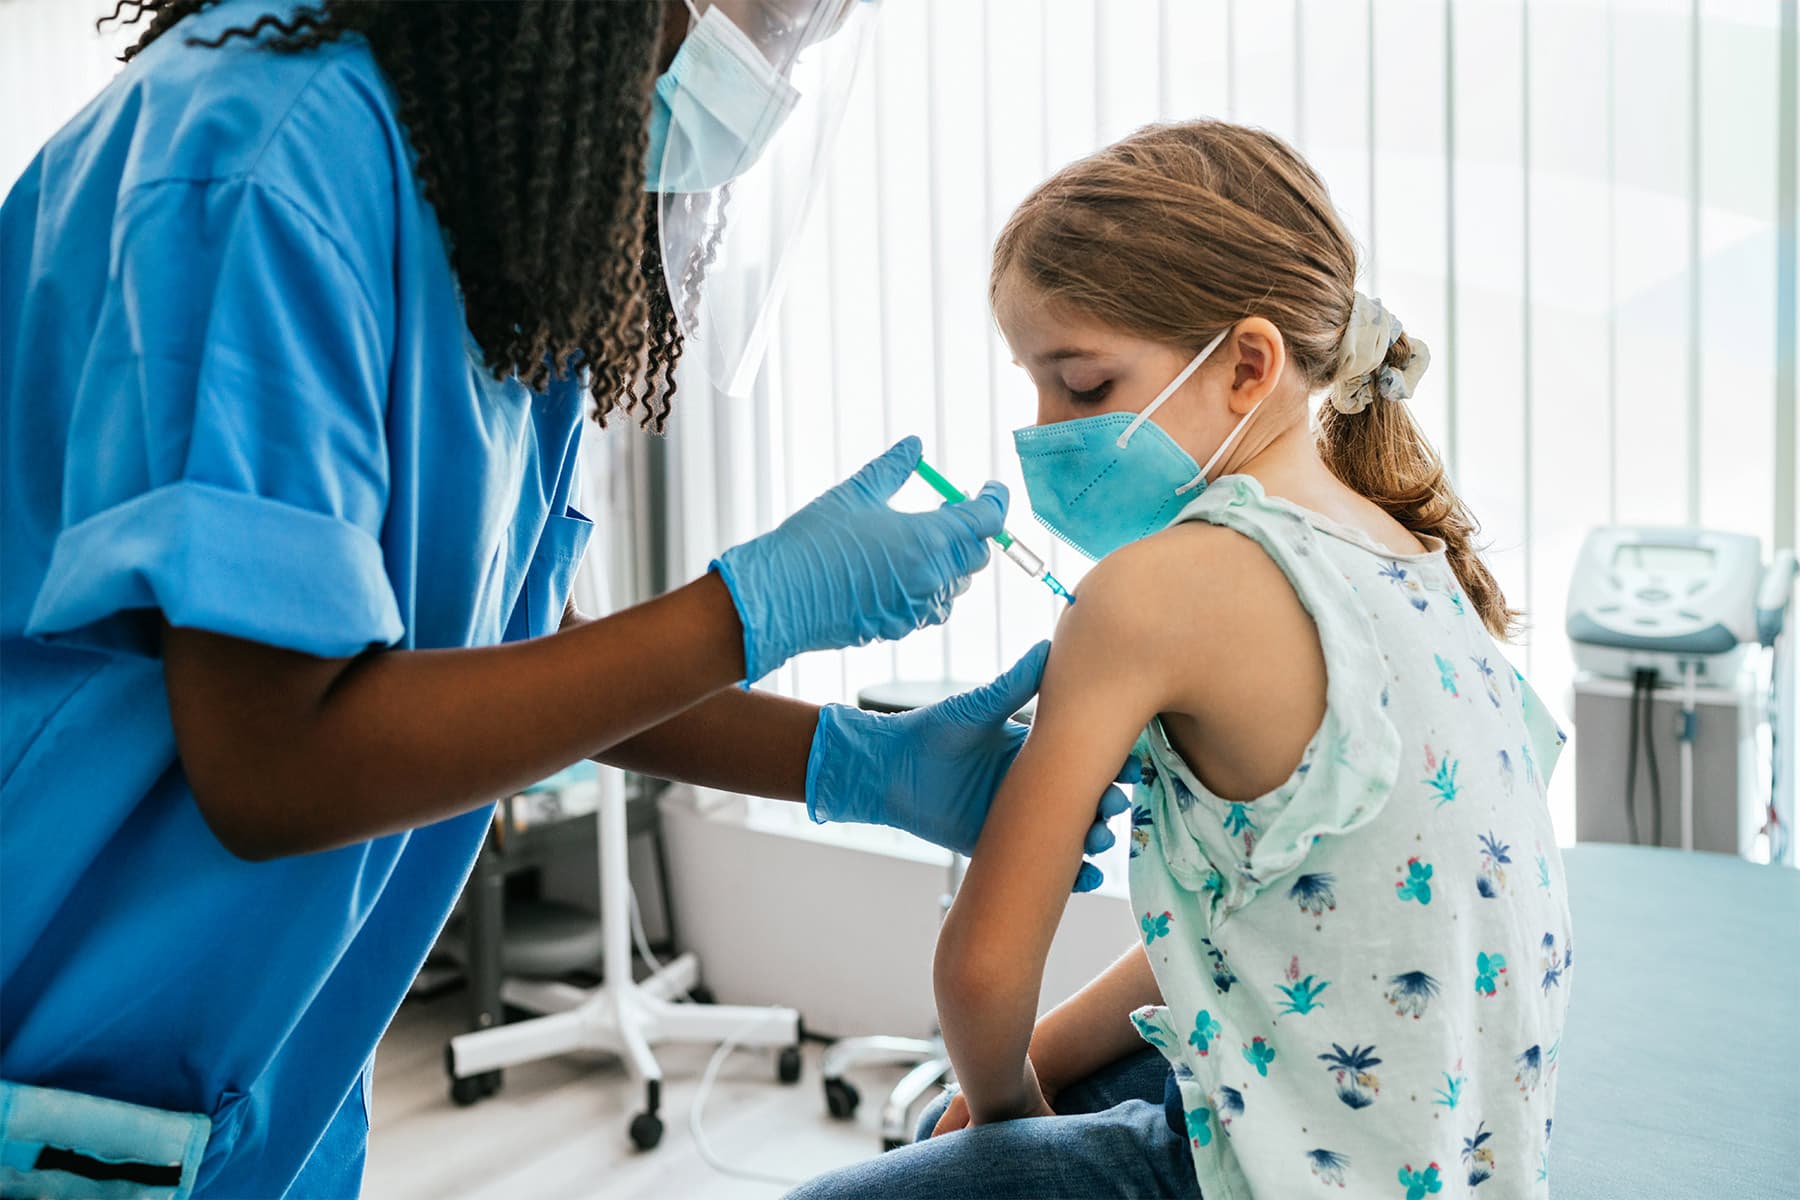 Countries With Universal Health Care Had Better Child Vaccination Rates During Pandemic